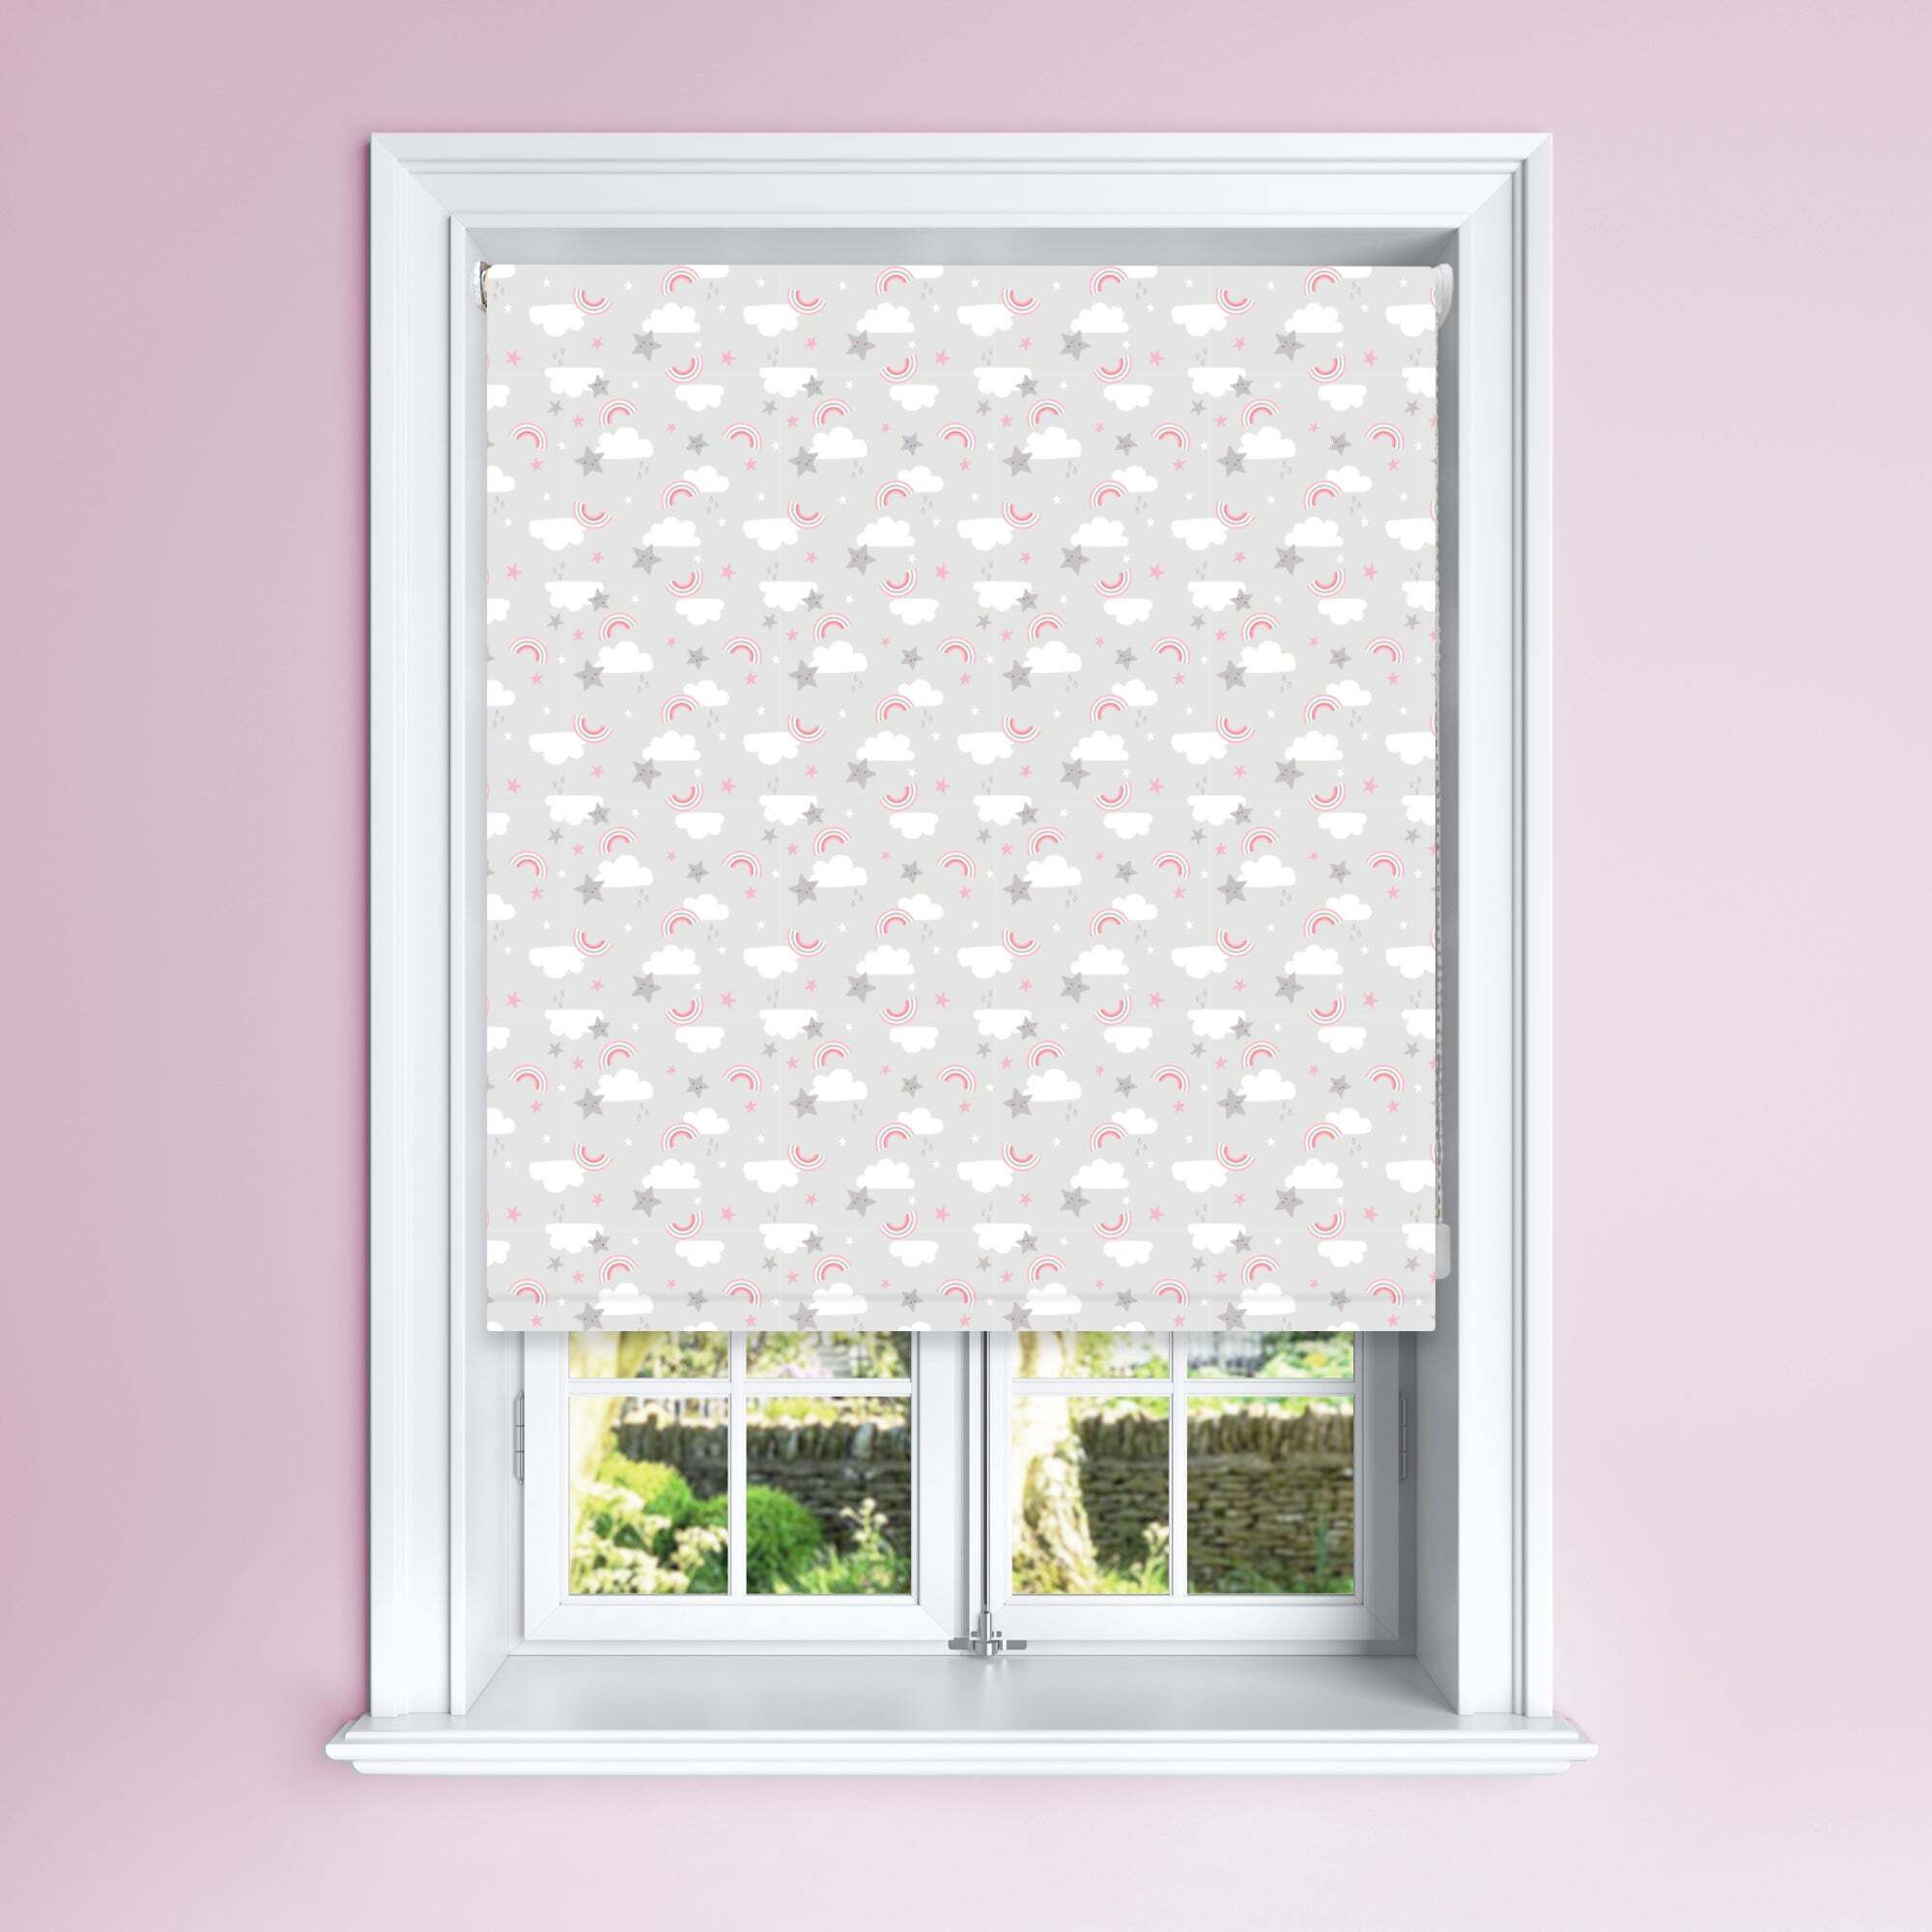 Grey Cloud & Rainbow Blackout Roller Blind Grey, Pink and White